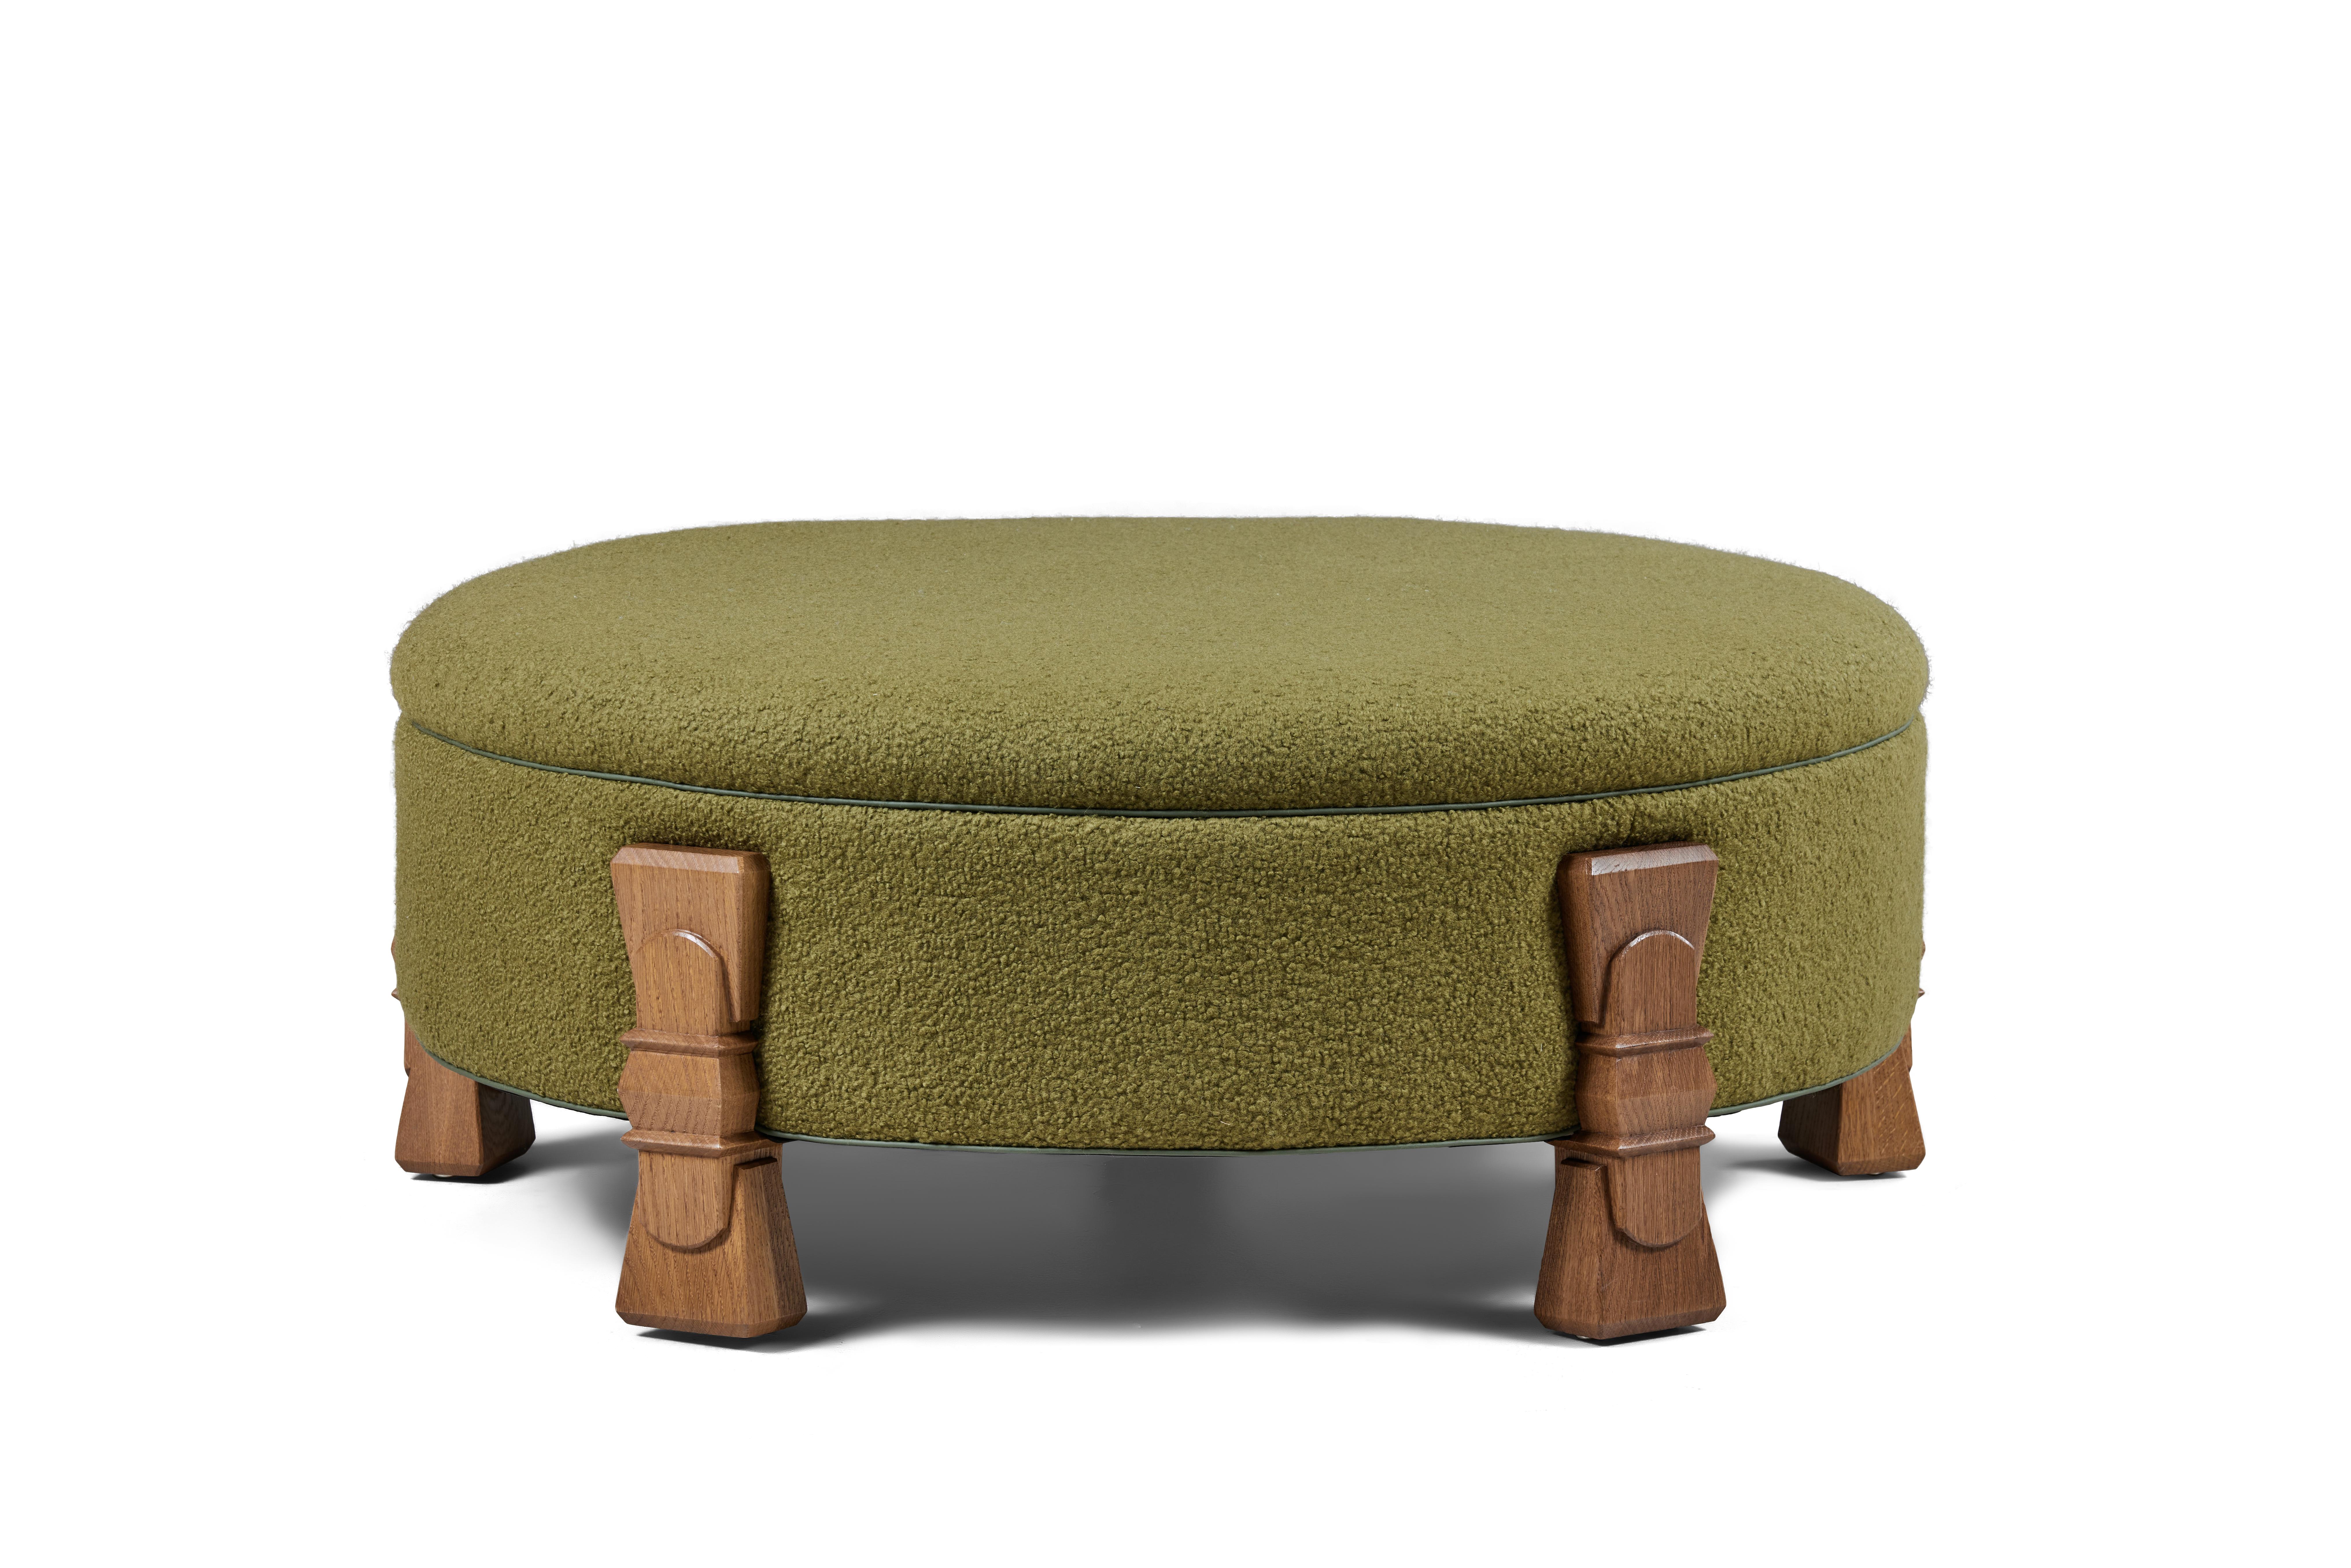 Our artisan-made Alden Ottoman is the newest addition to our line. The hand-carved legs are made by local artisans.

Equally, at home in a Lake Tahoe chalet, Sea Ranch beachfront dwelling or Laurel Canyon abode, we designed this piece with